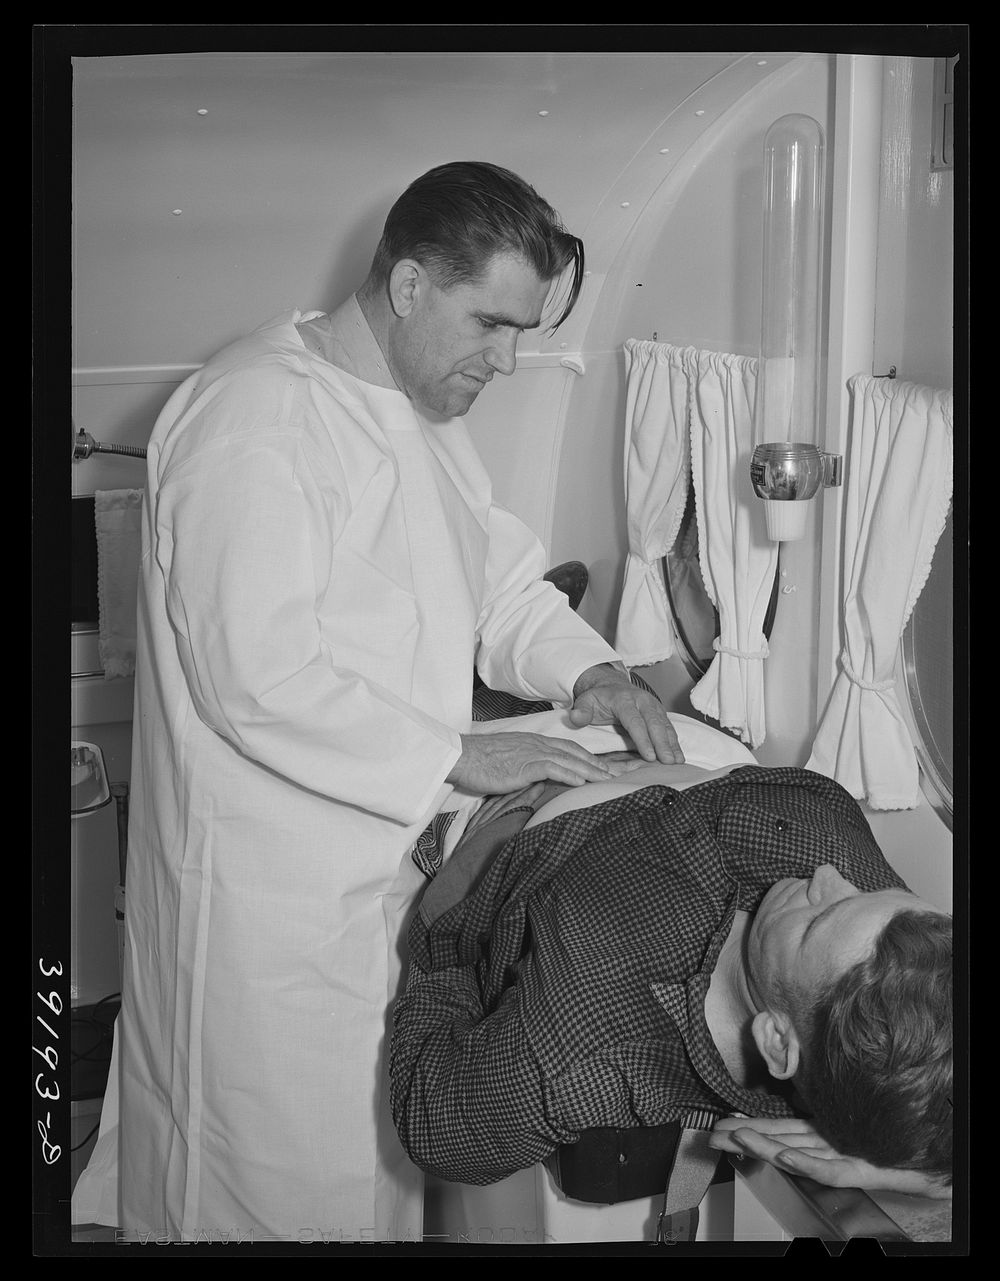 Examination in trailer-clinic at the FSA (Farm Security Administration) migratory labor camp mobile unit. Wilder, Idaho by…